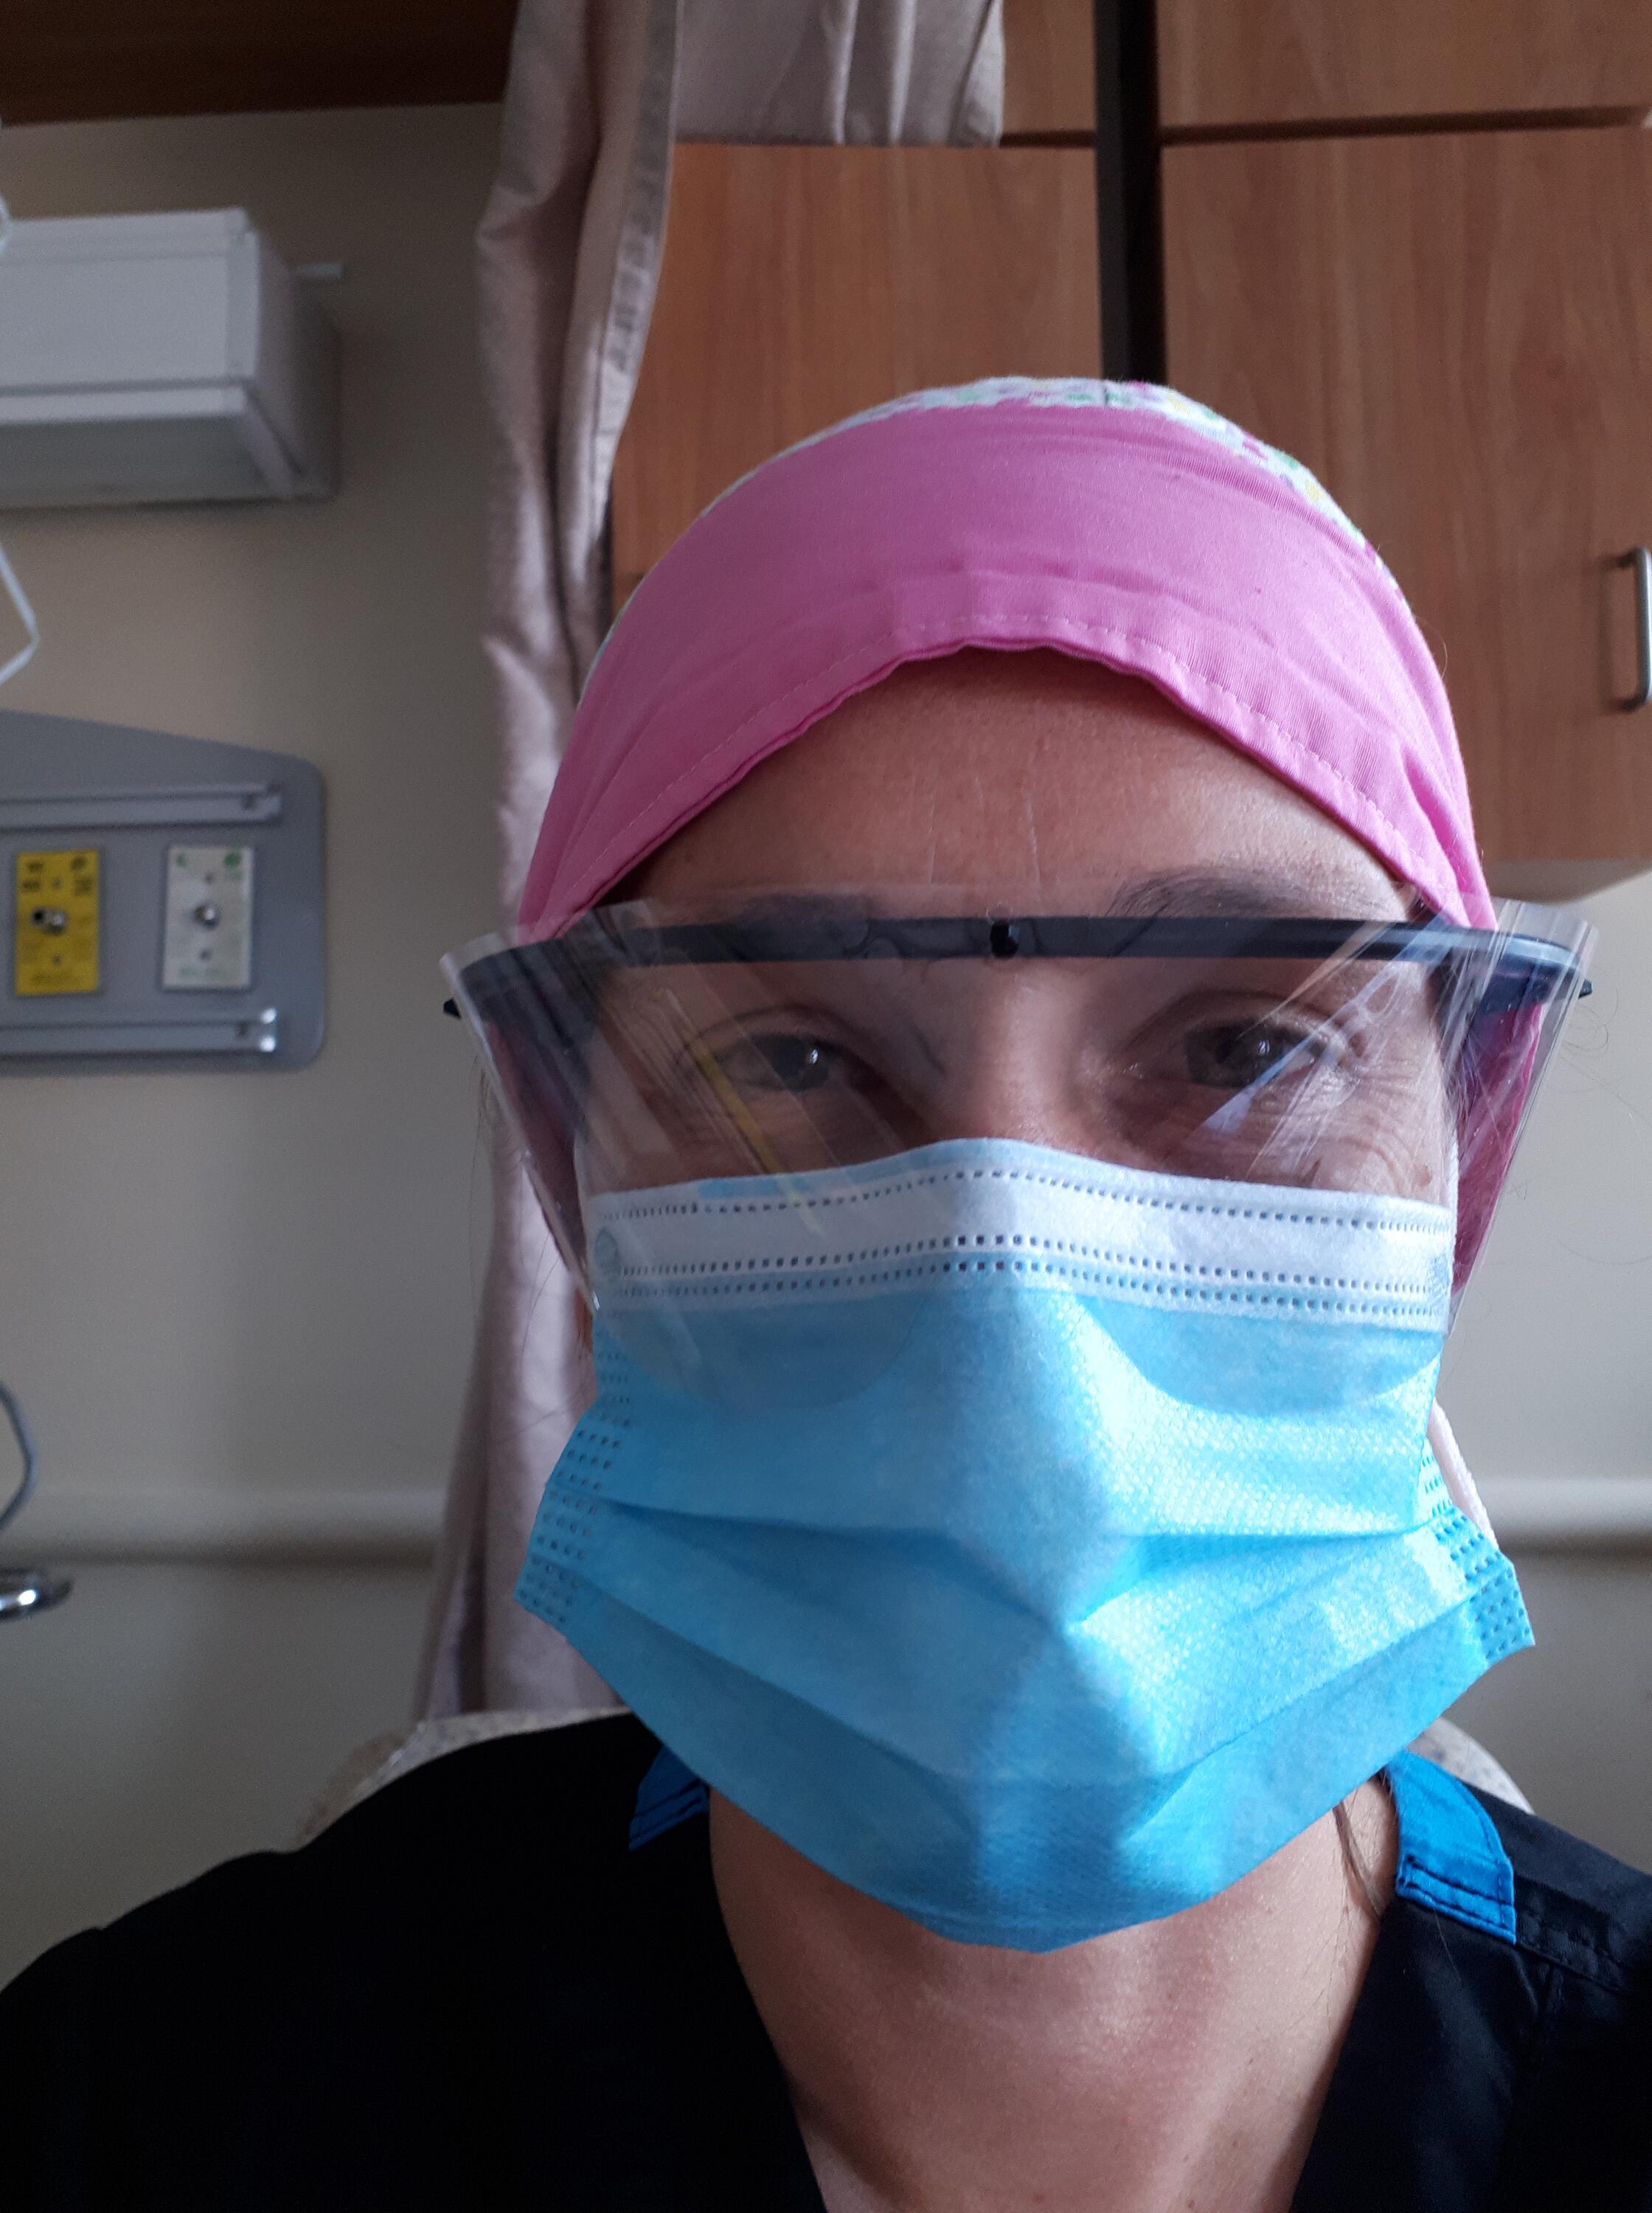 Alisa wears her protective equipment at the hospital